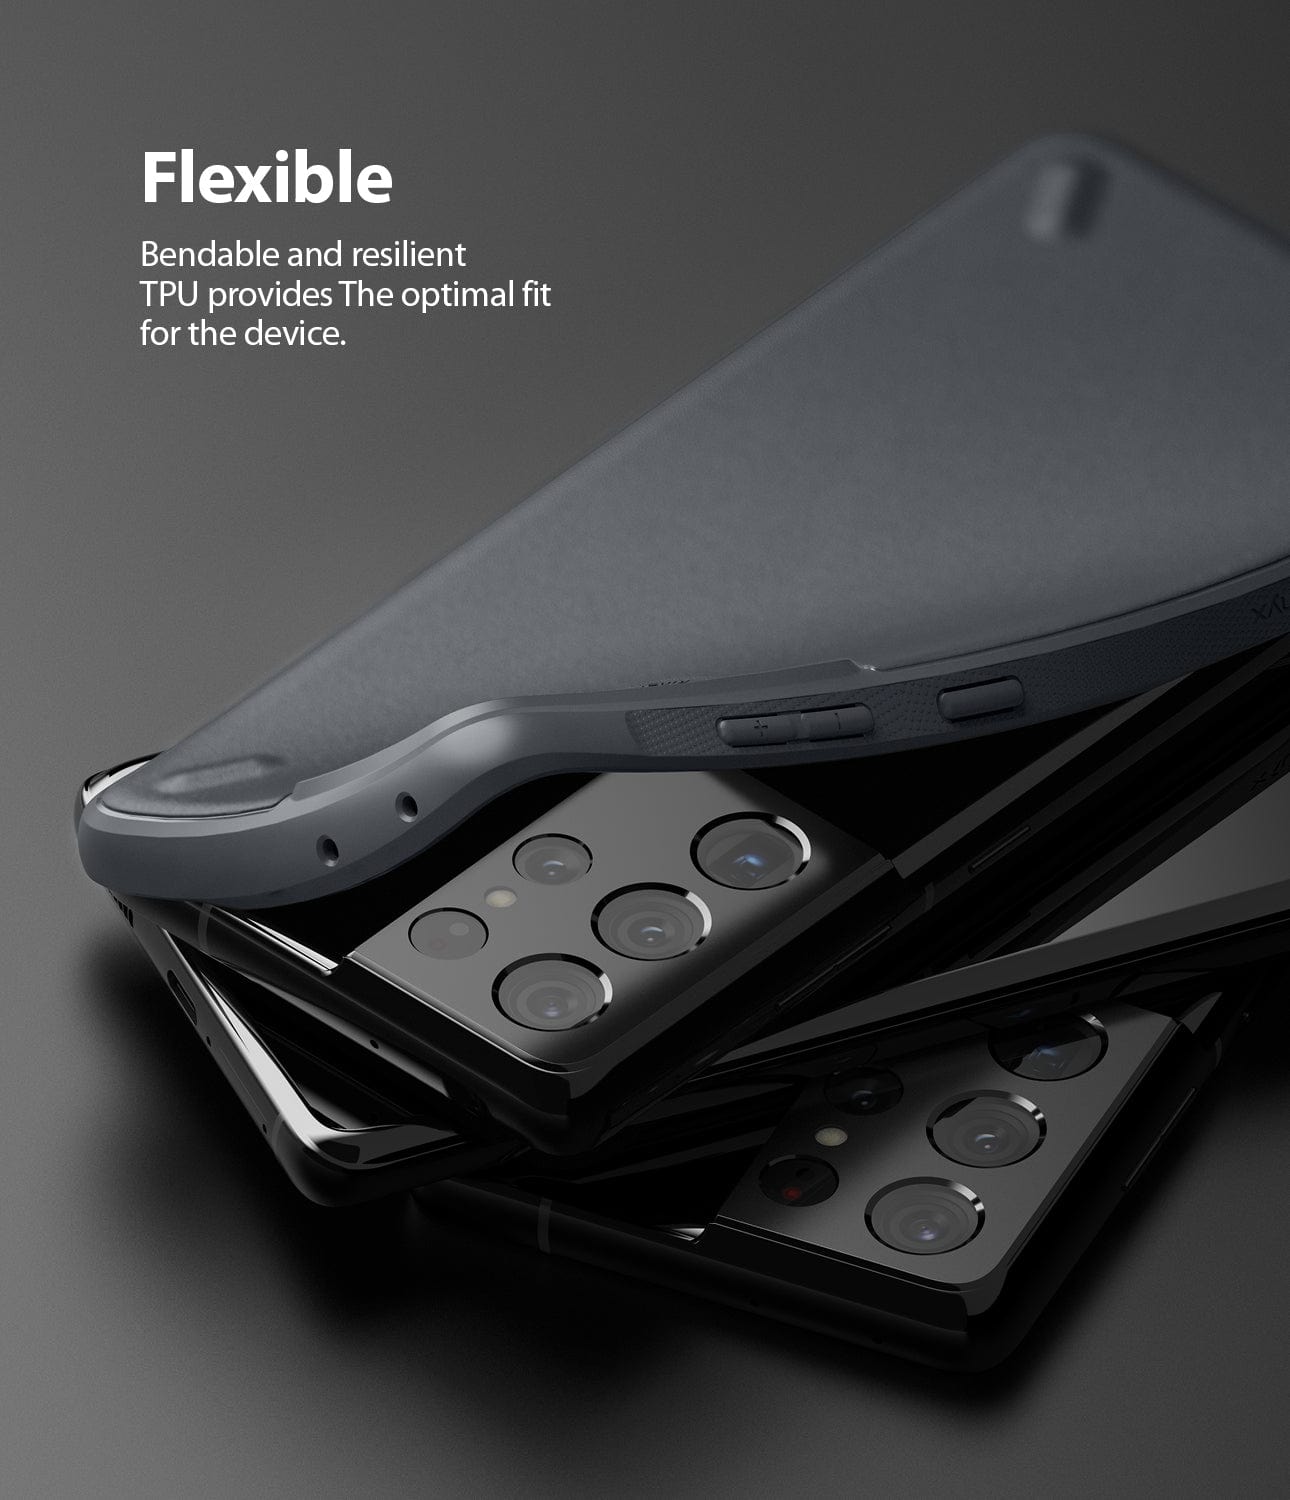 The rugged exterior of the Ringke Onyx Case provides better grip for comfortable handling of your Galaxy S21 Ultra, ensuring a secure hold in your hand.